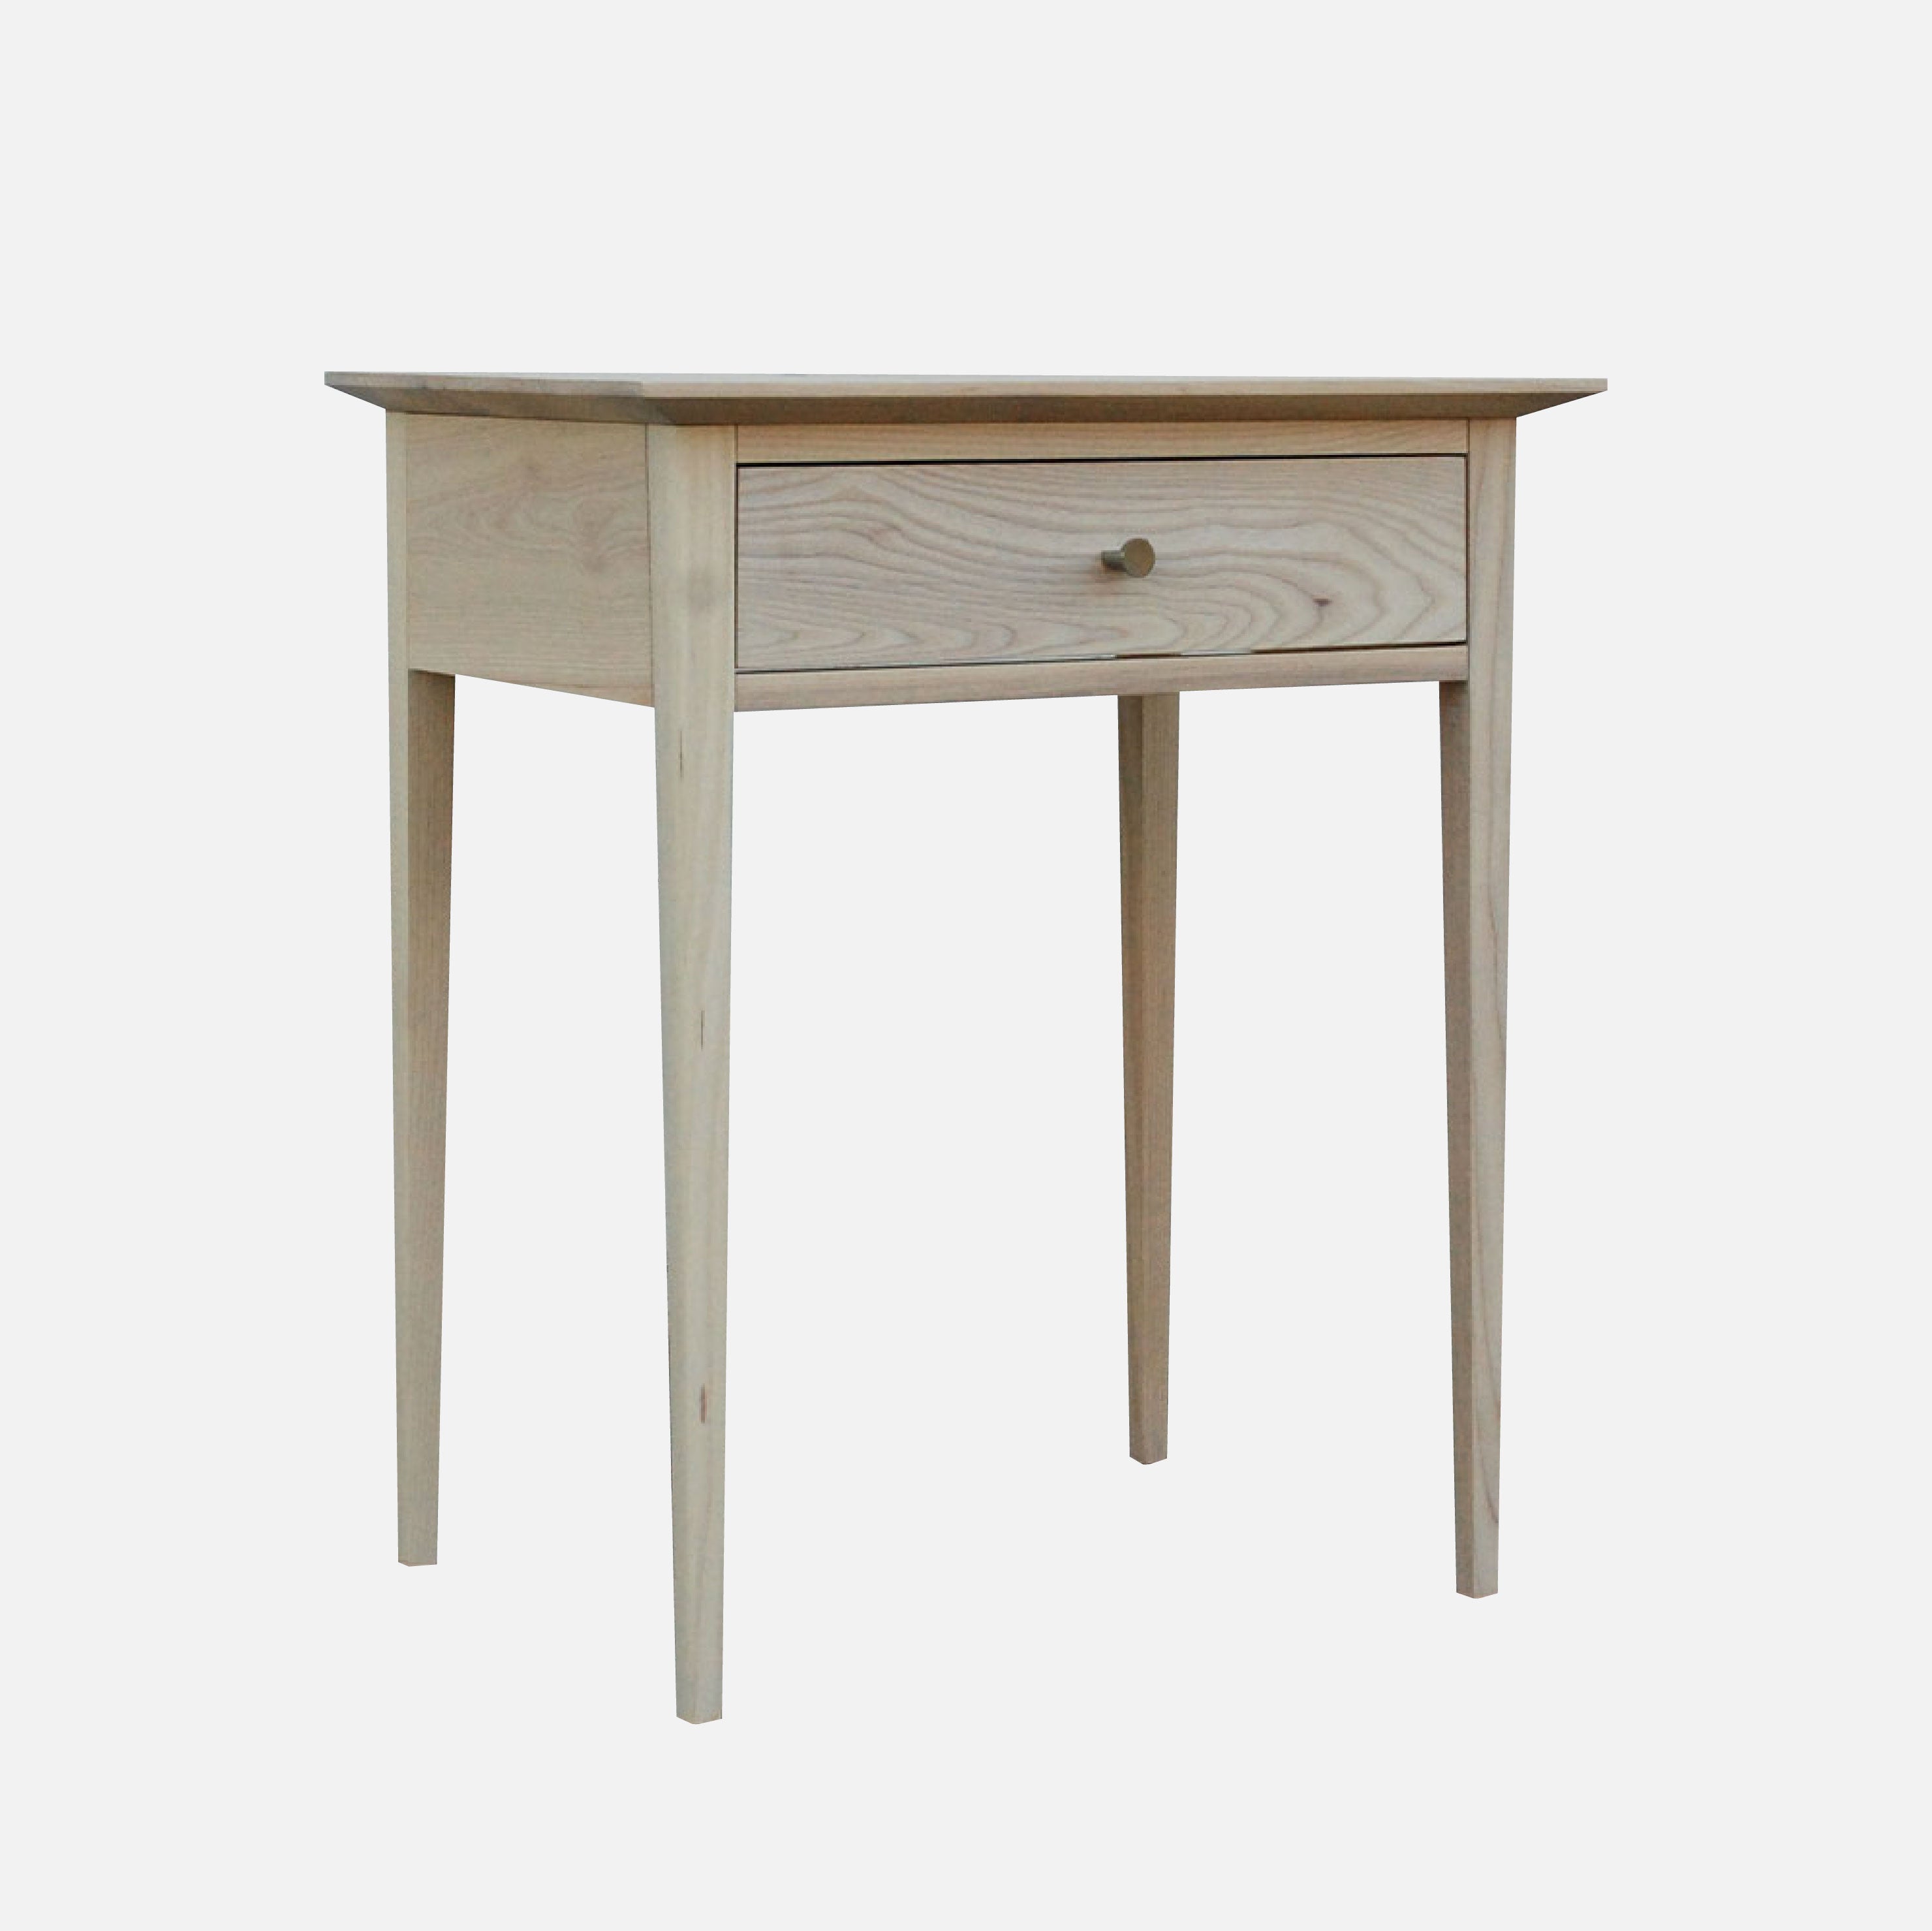 Maine Bedside Table - White Ash